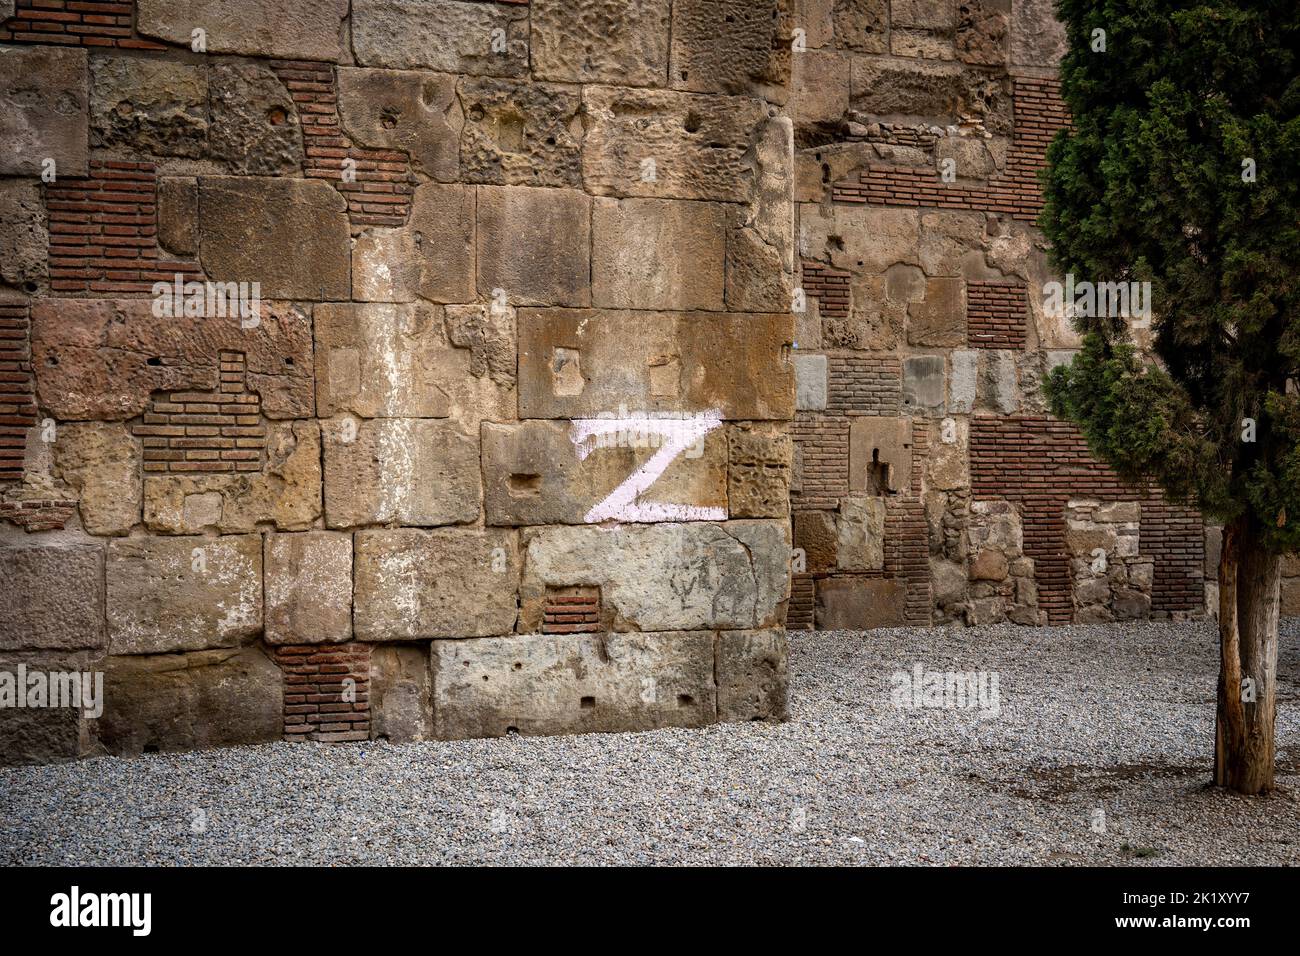 Russian Z Graffiti on walls near the Cathedral of Barcelona, Catalonia, Spain 17 September 2022 - where it had remained for several days. A Ukrainian Stock Photo